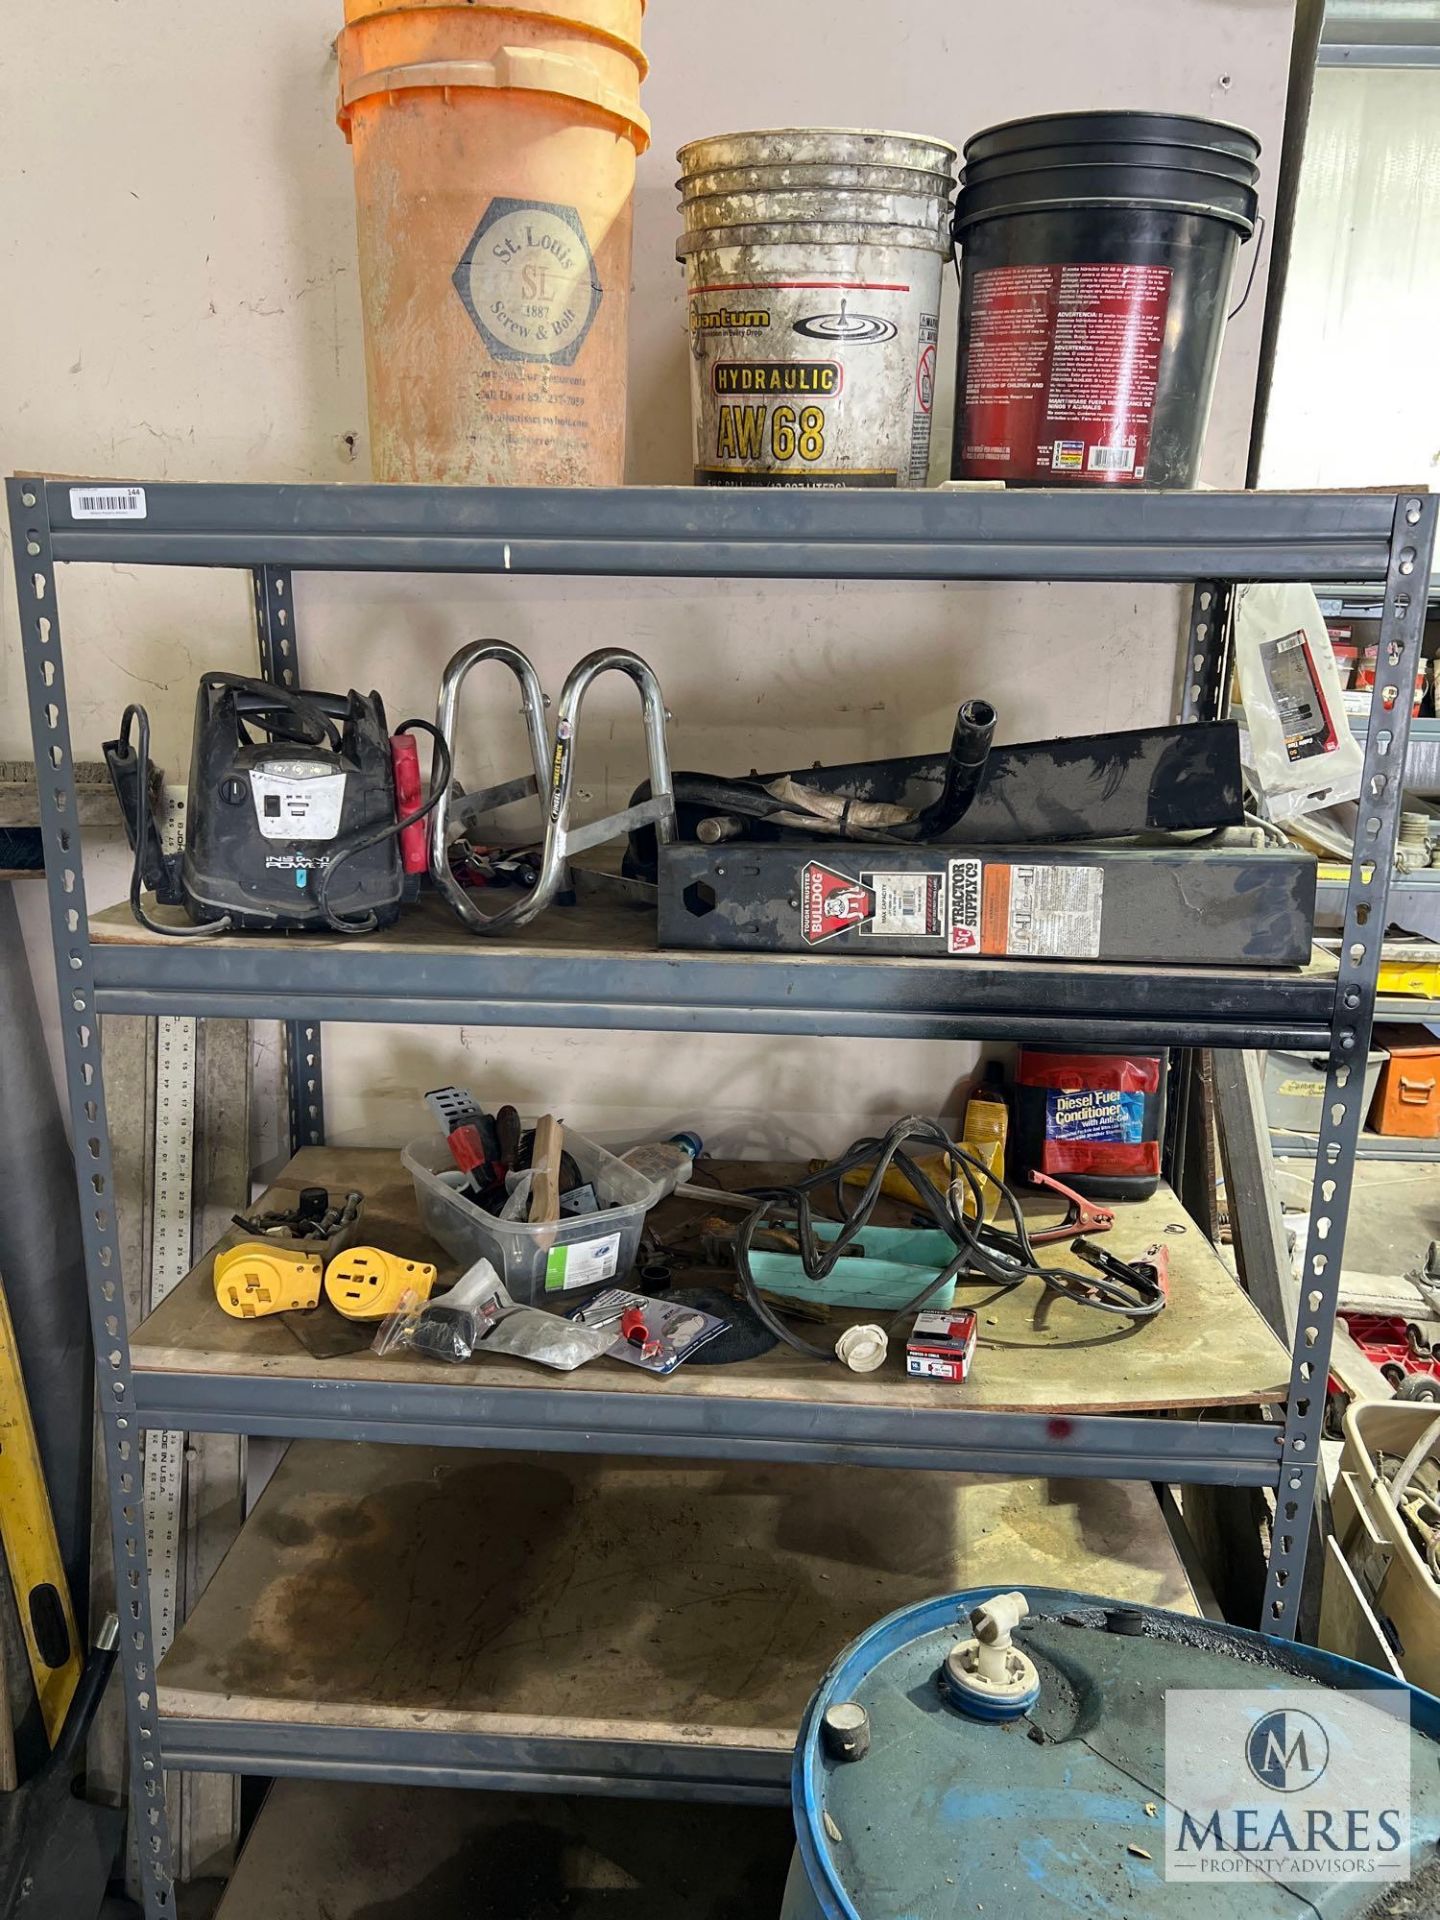 Shelf and Contents - Battery Chargers, Electrical Items, Hardware